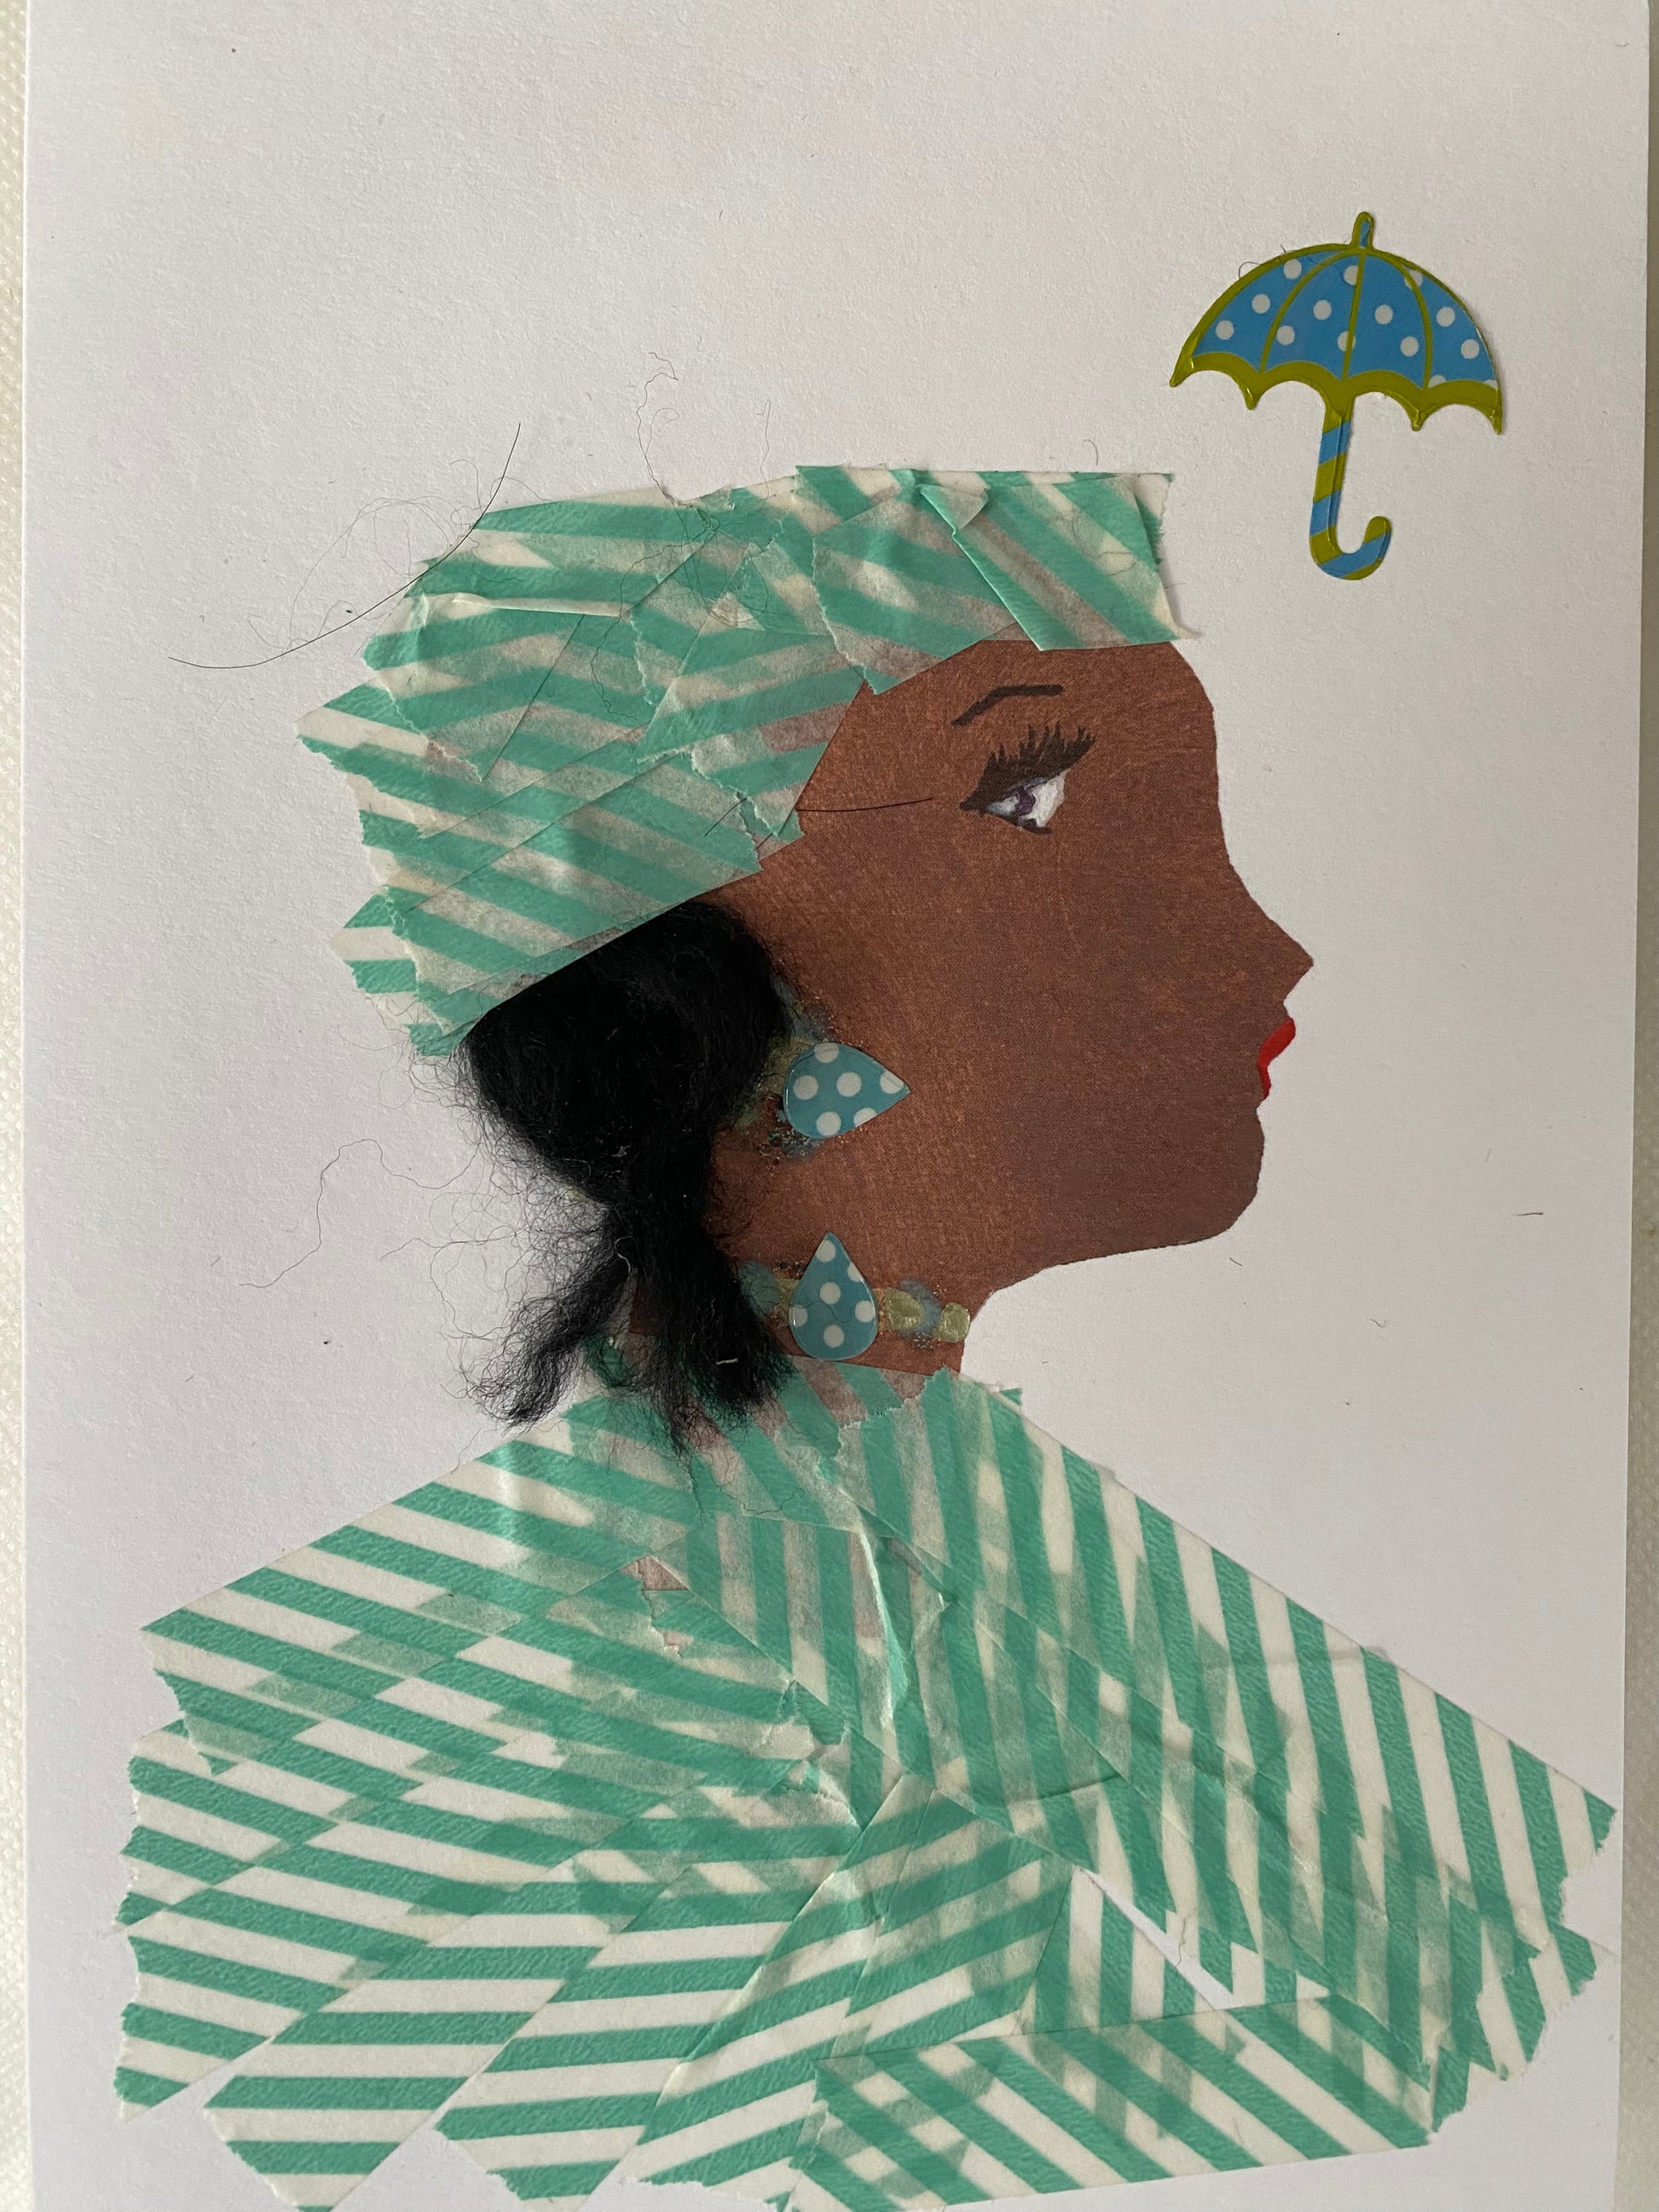 I designed this card of a woman named Fabulous Florah. She has a brown skin tone and is wearing a blue stripe hat. She wears a matching blue stripe blouse. She wears blue polka dot jewellery. In the corner there is a blue and yellow umbrella.